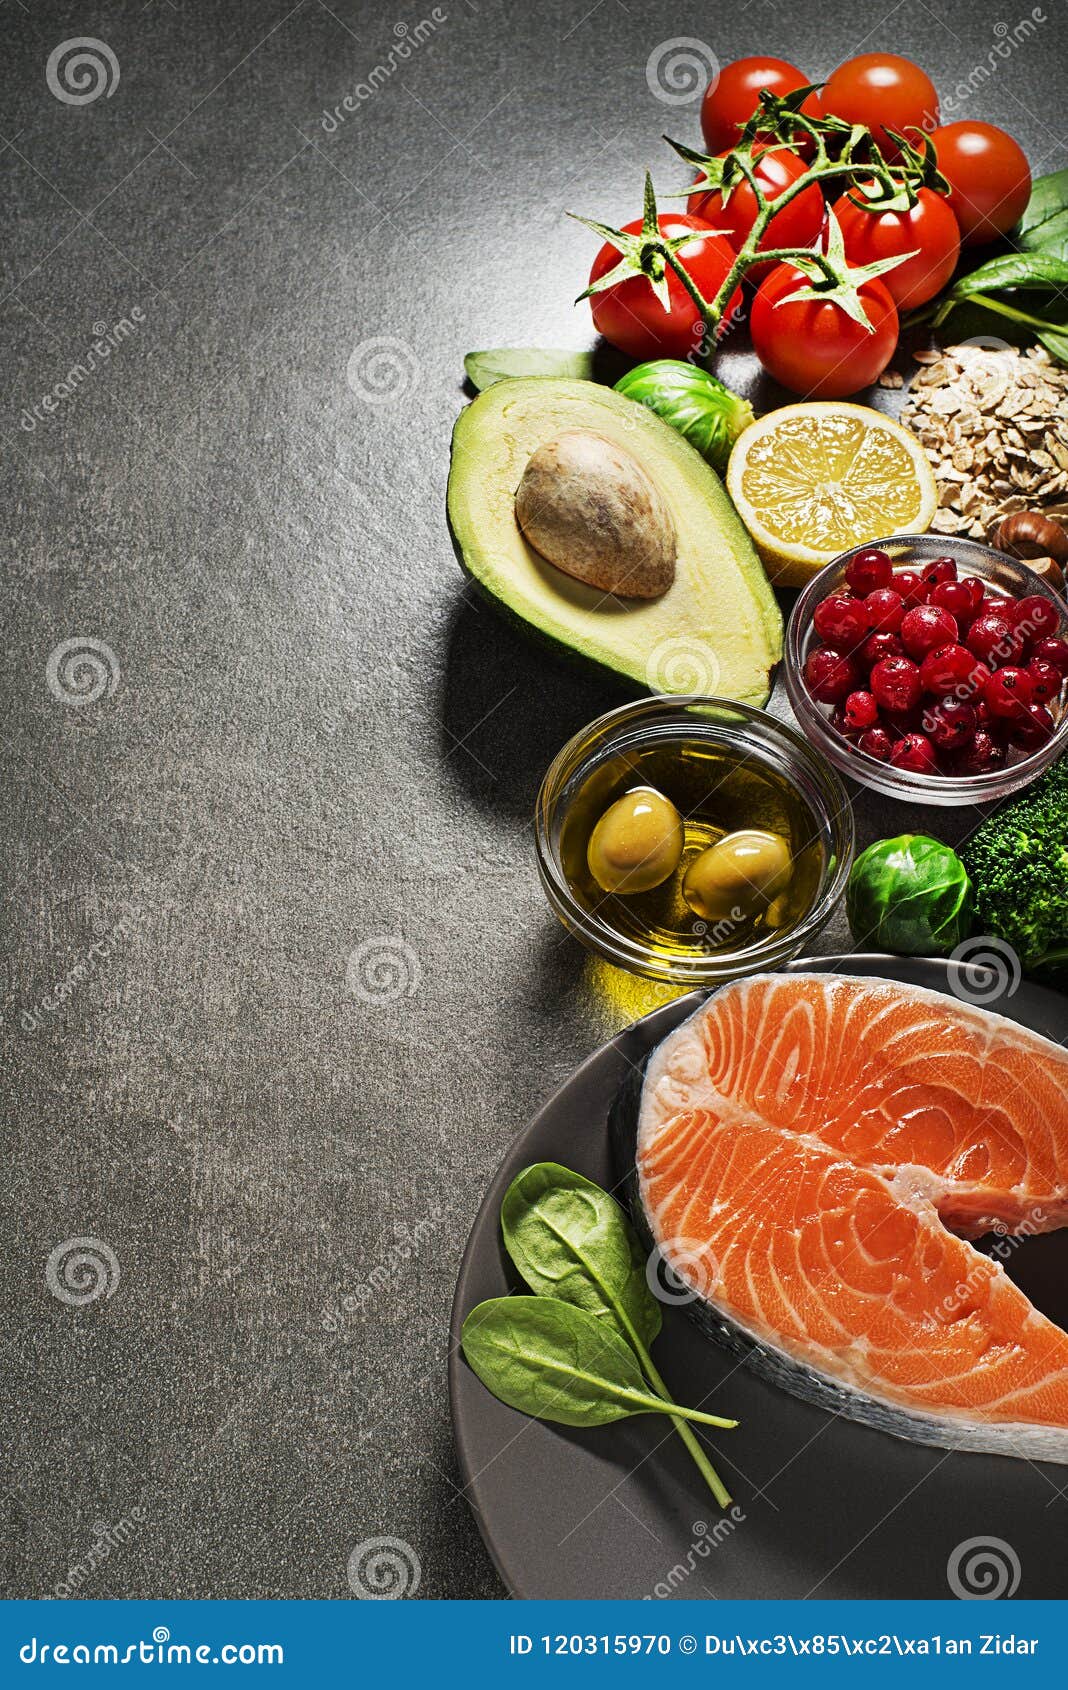 Healthy Diet Foods For Heart Cholesterol And Diabetes Stock Photo Image Of Nutrition Brussels 120315970